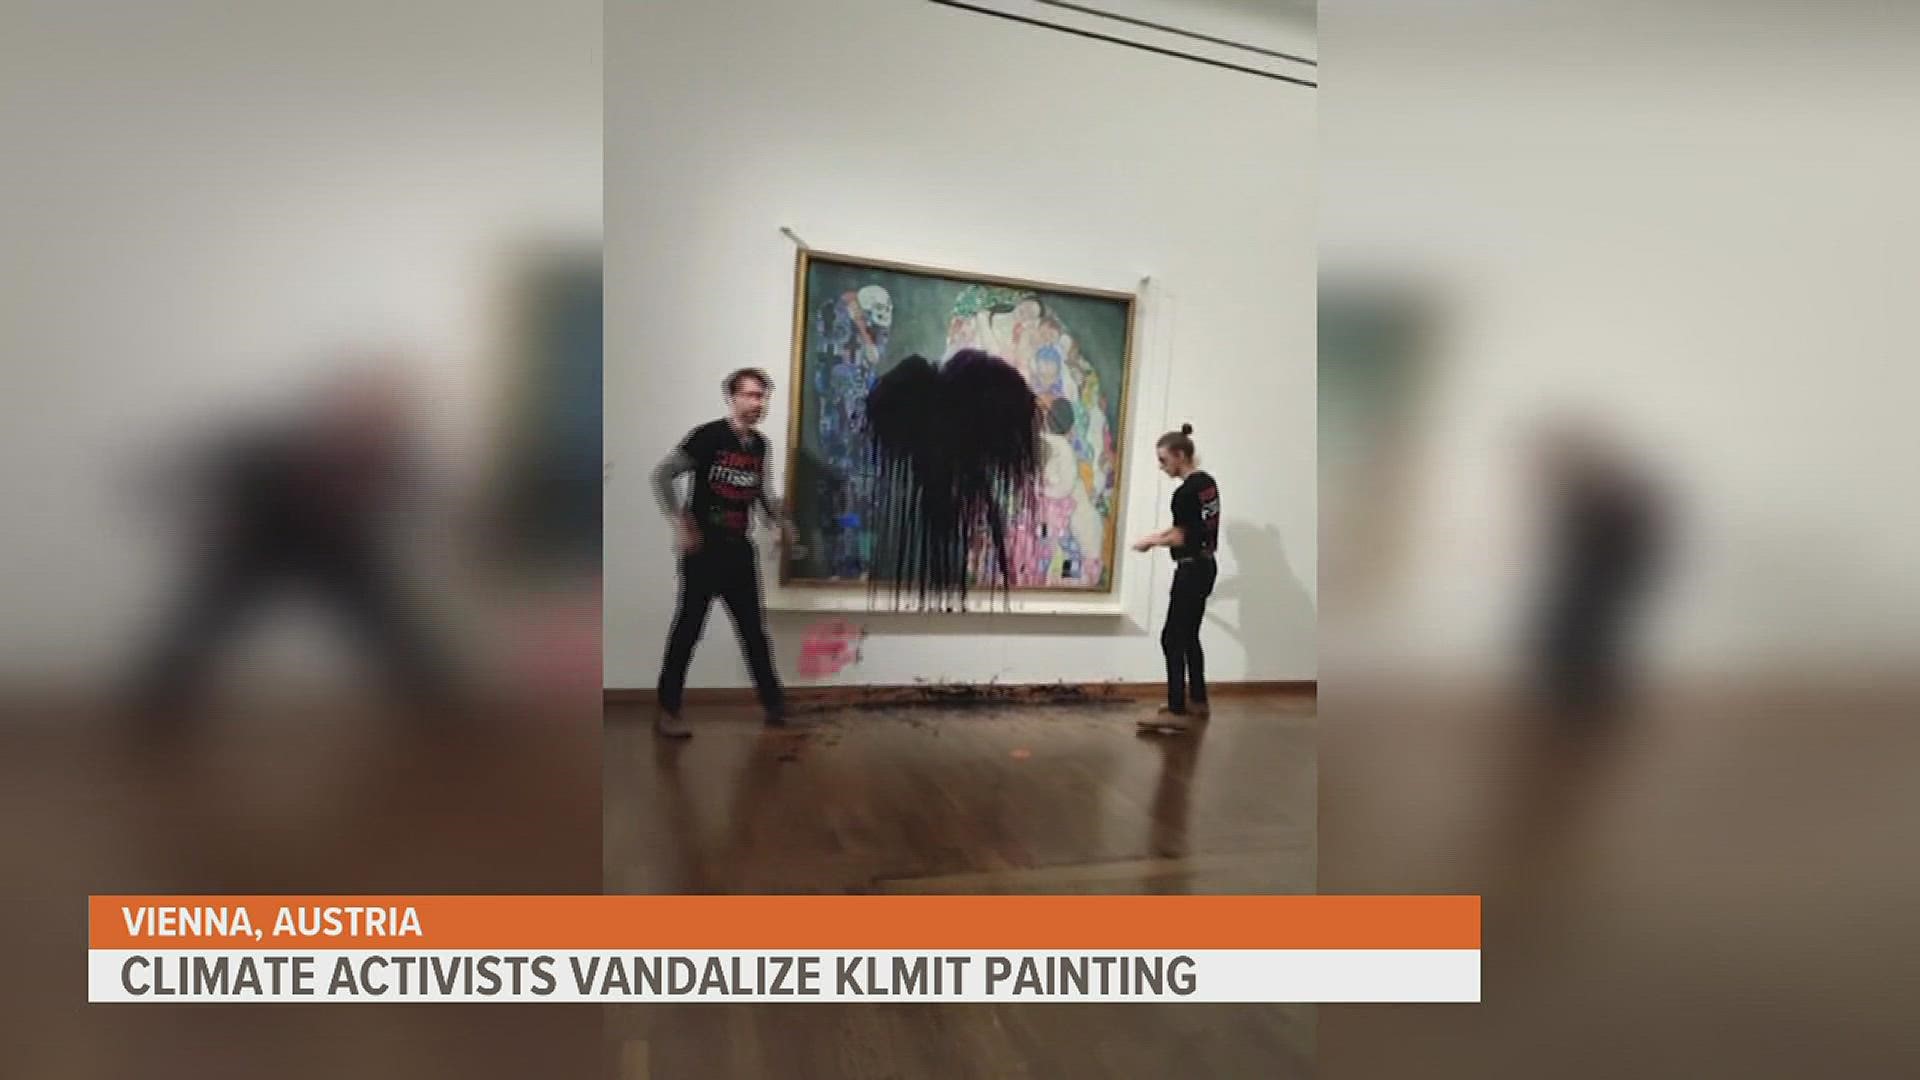 One activist threw liquid on the painting called "Death and Life." Another activist glued his hand to the glass protecting the art work. The art was not damaged.